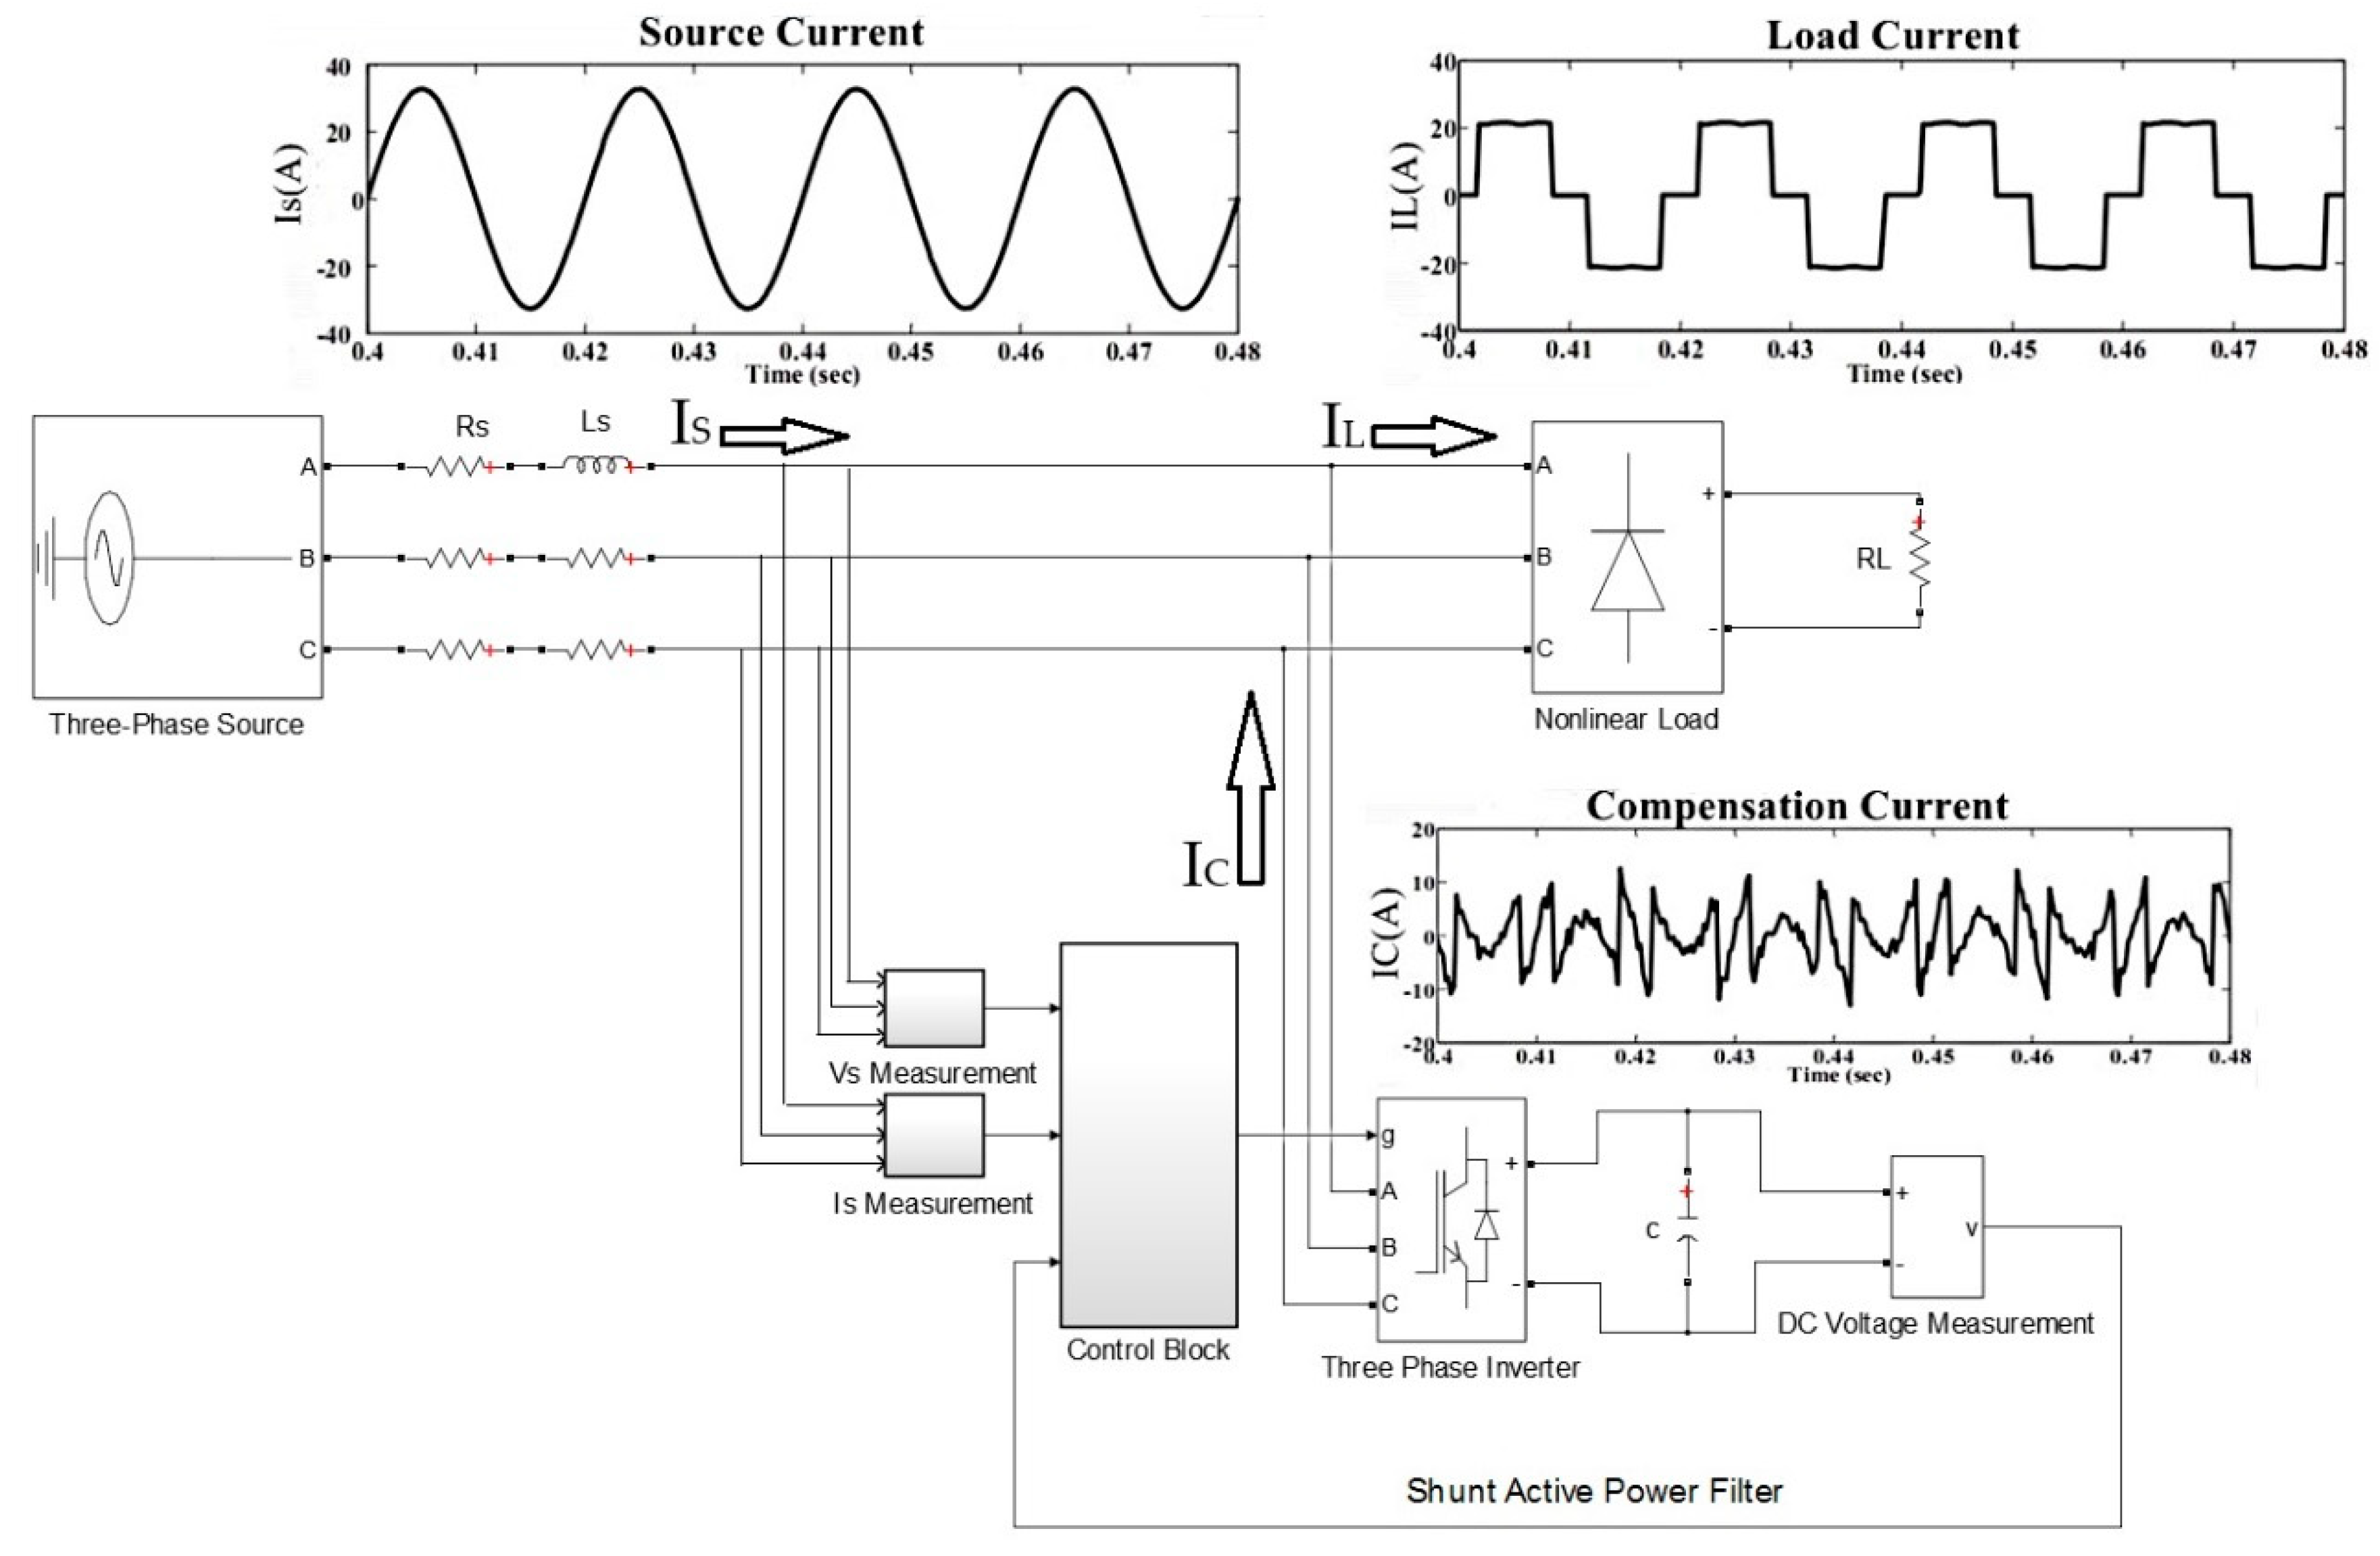 Electronics | Free Full-Text | Modeling and Simulation of a PI Controlled  Shunt Active Power Filter for Power Quality Enhancement Based on P-Q Theory